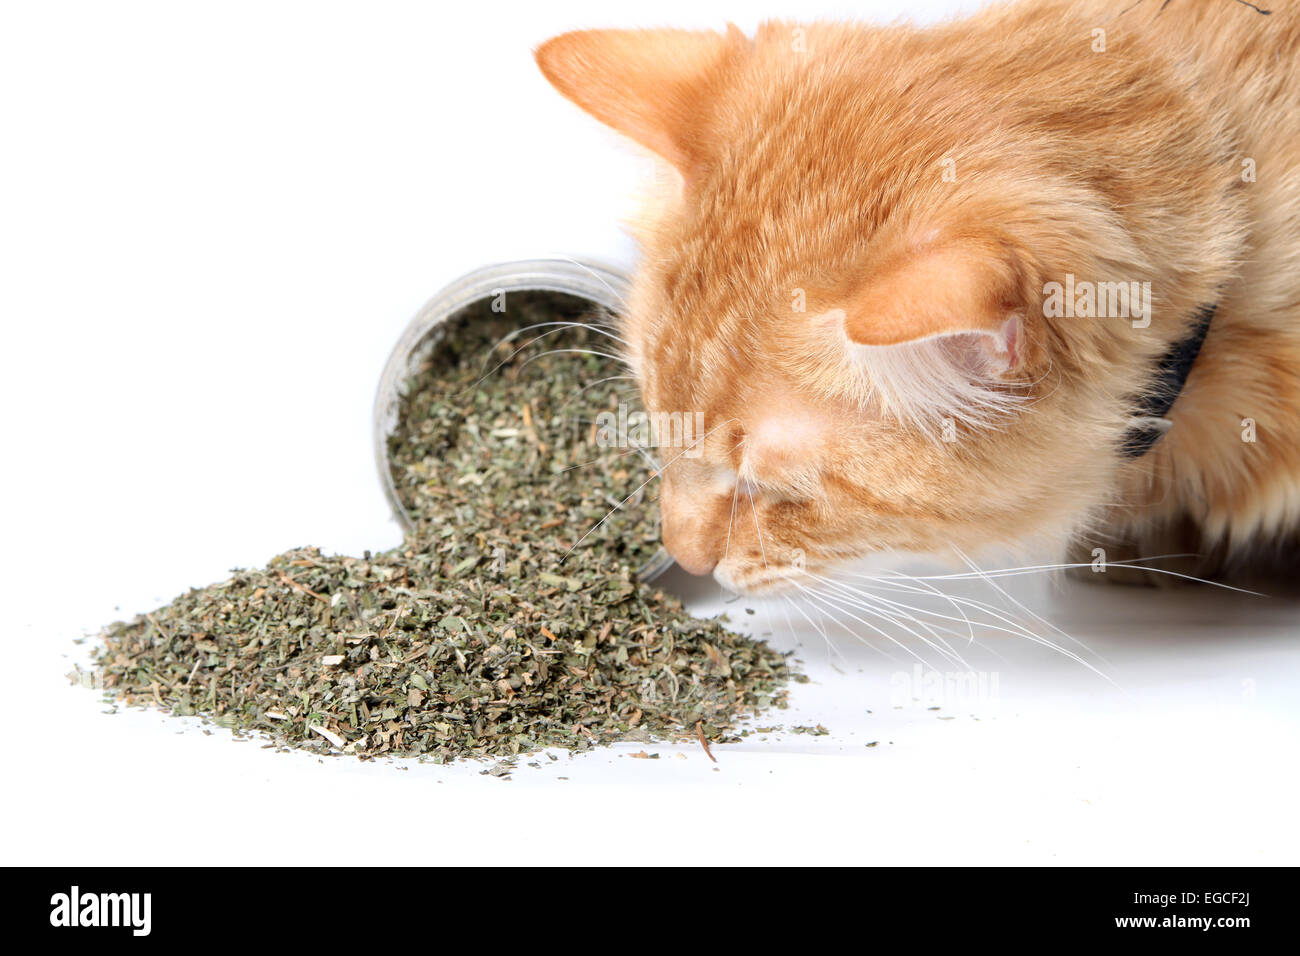 Orange cat smelling dried catnip spilled over from container on white background Stock Photo